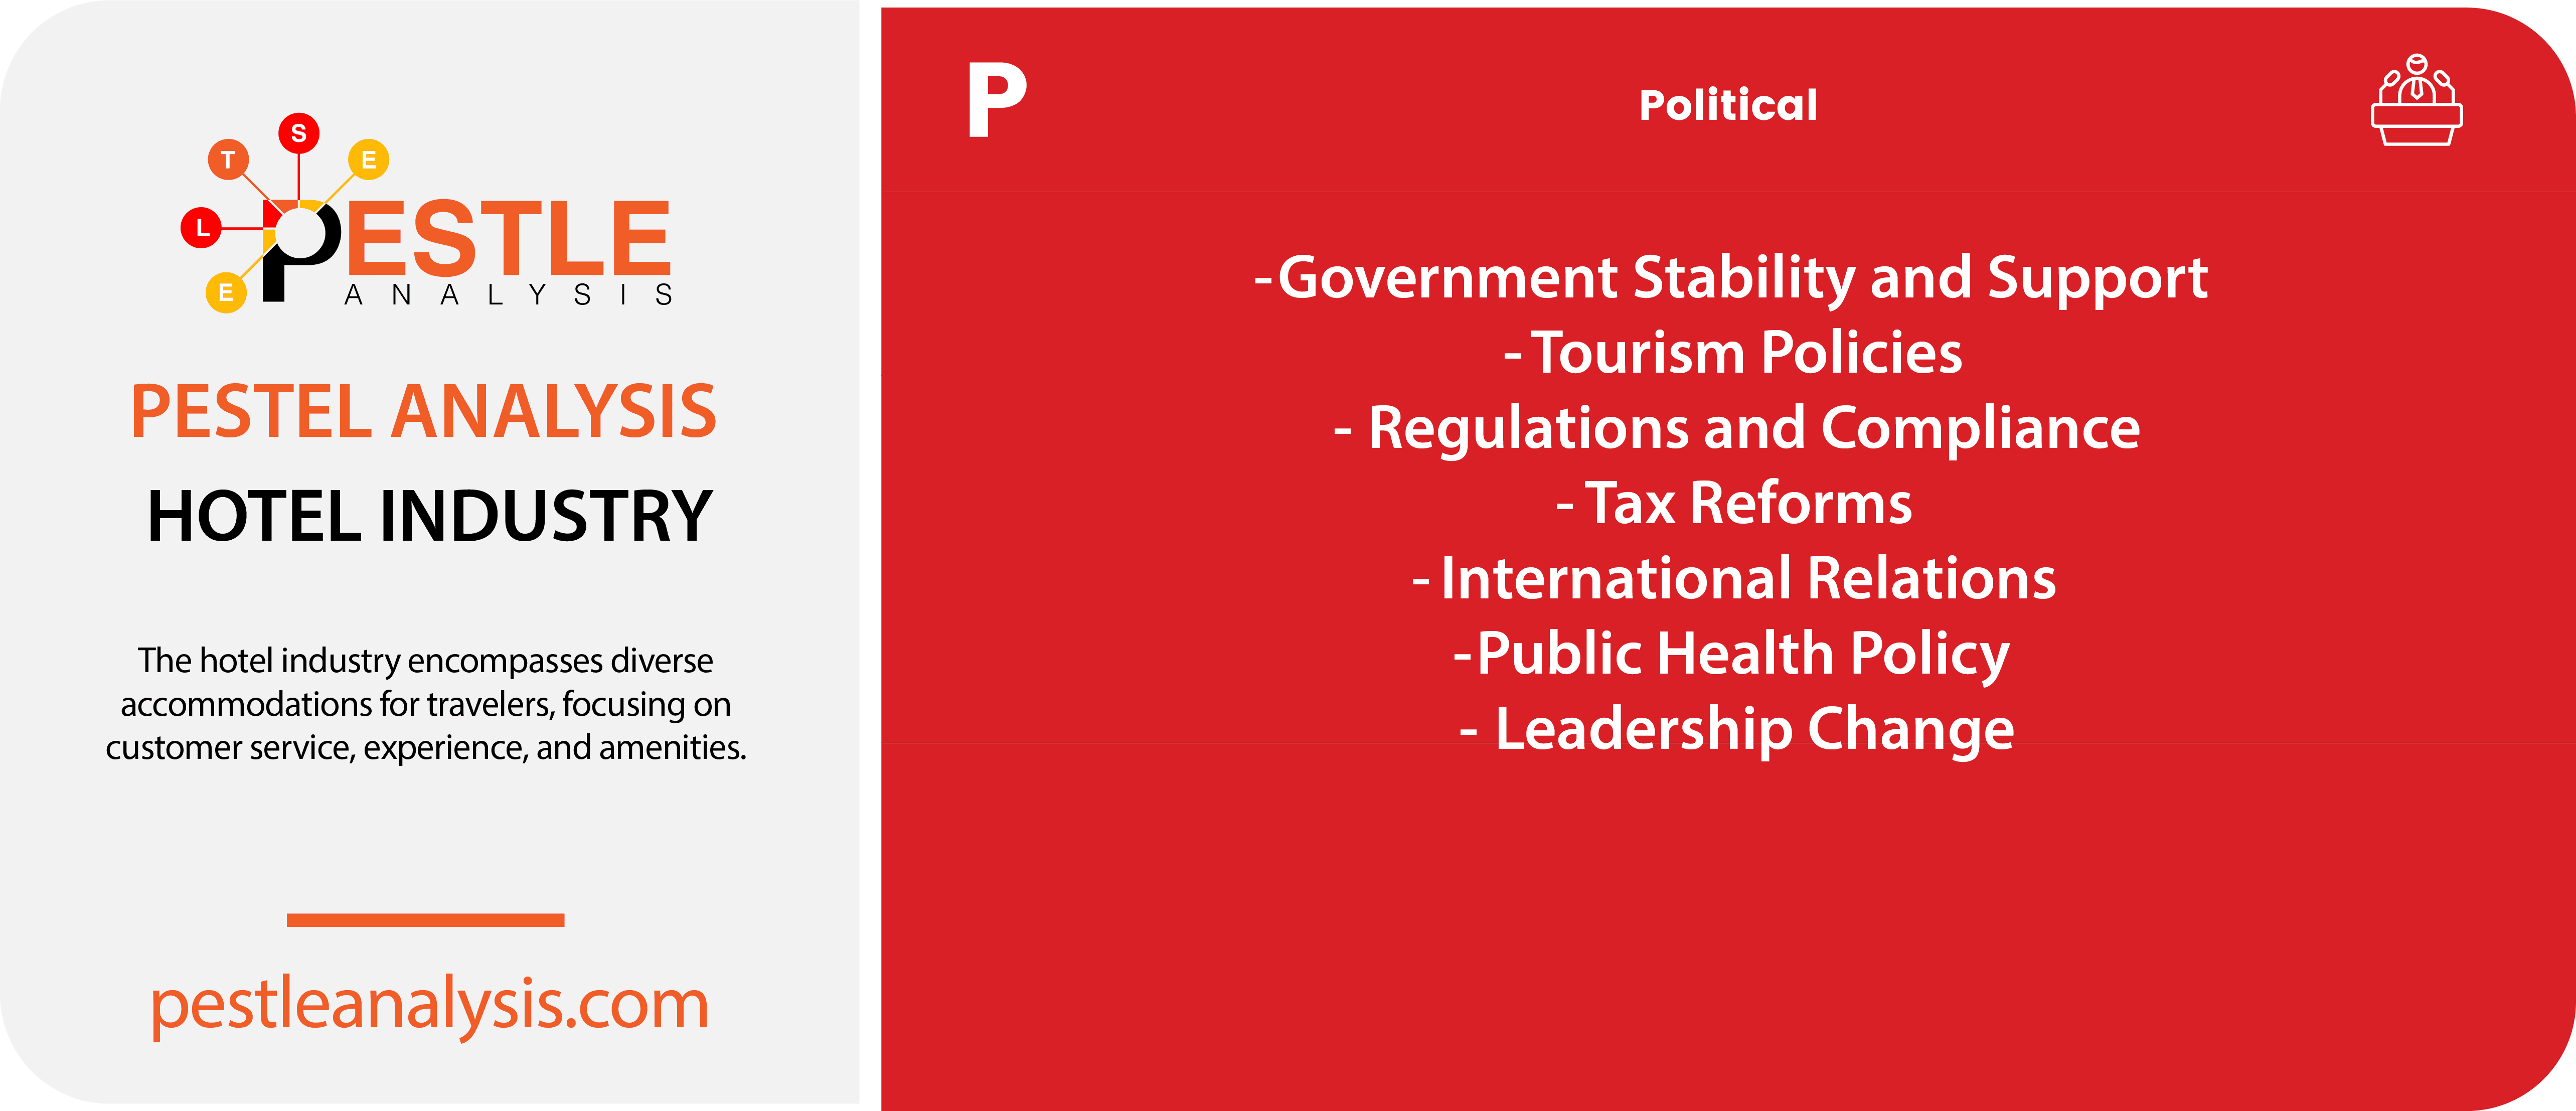 hotel-industry-pestle-analysis-political-factors-template